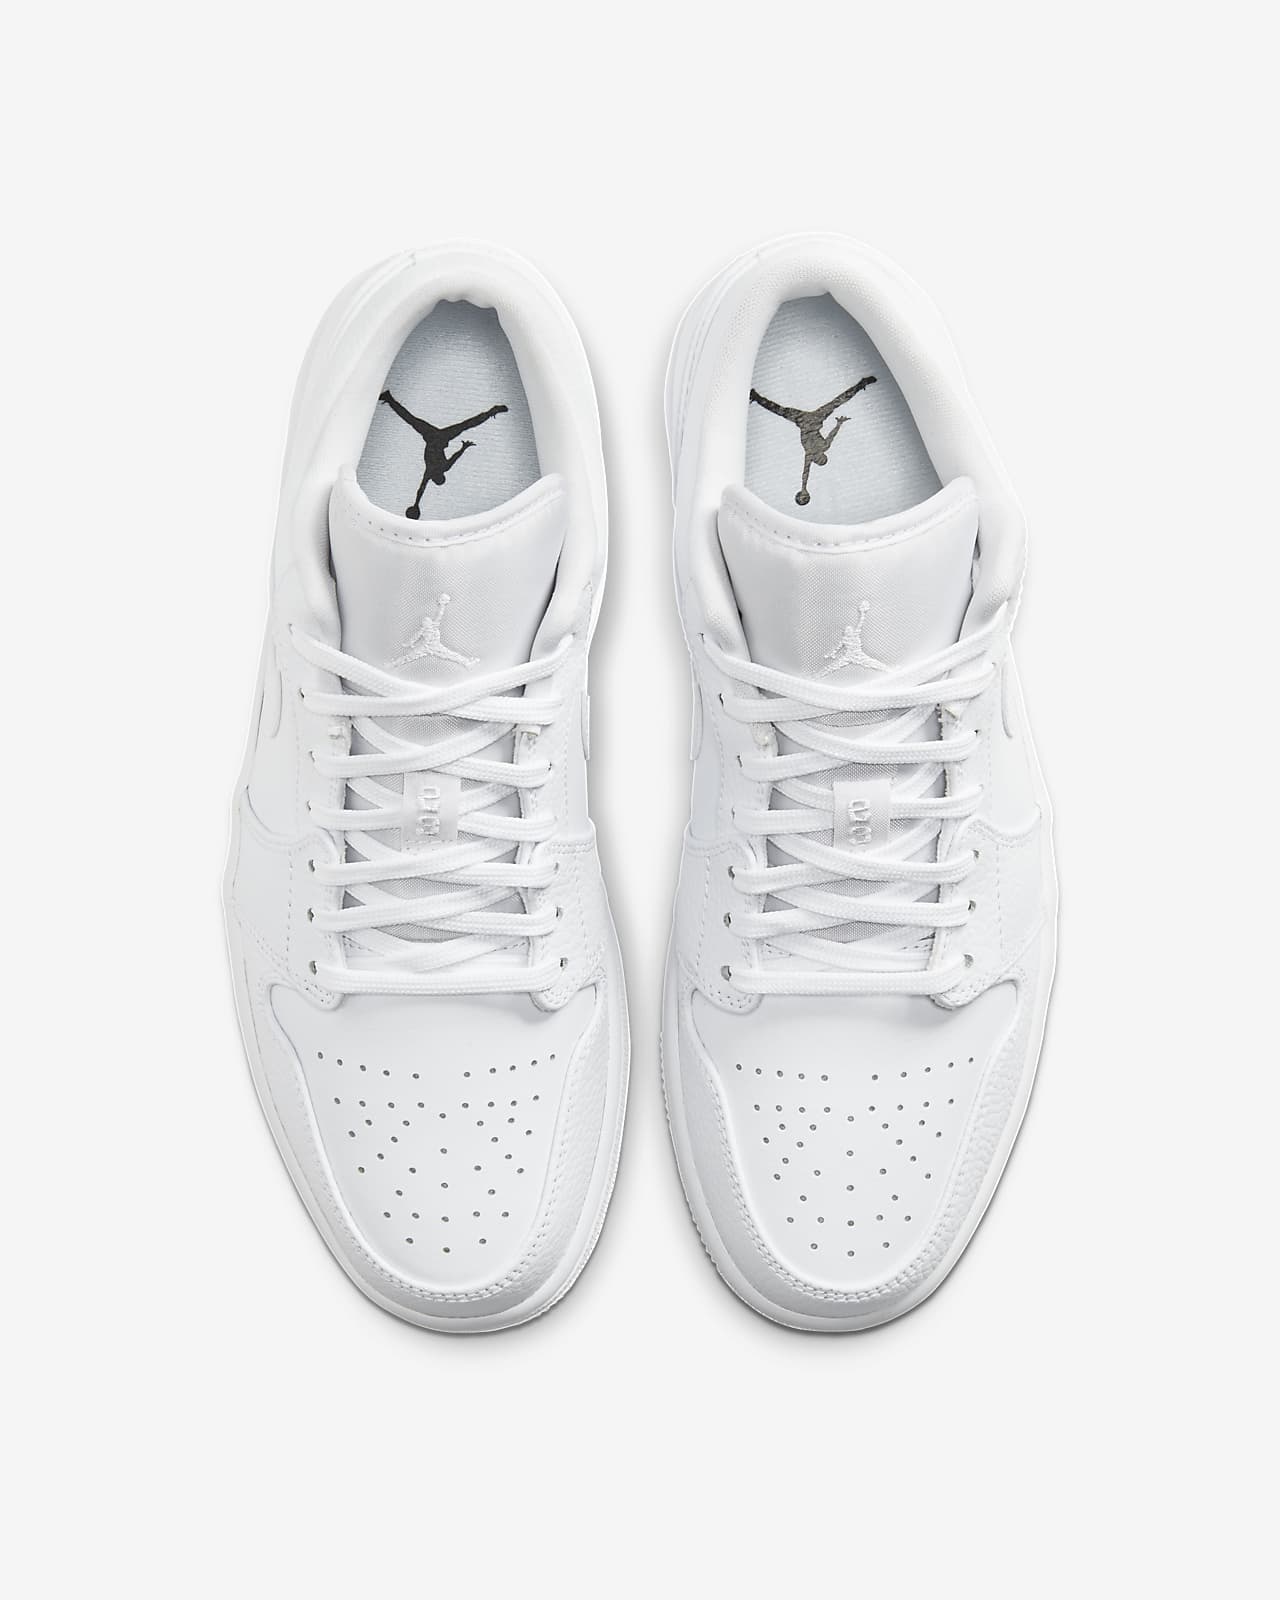 jd1 low all white